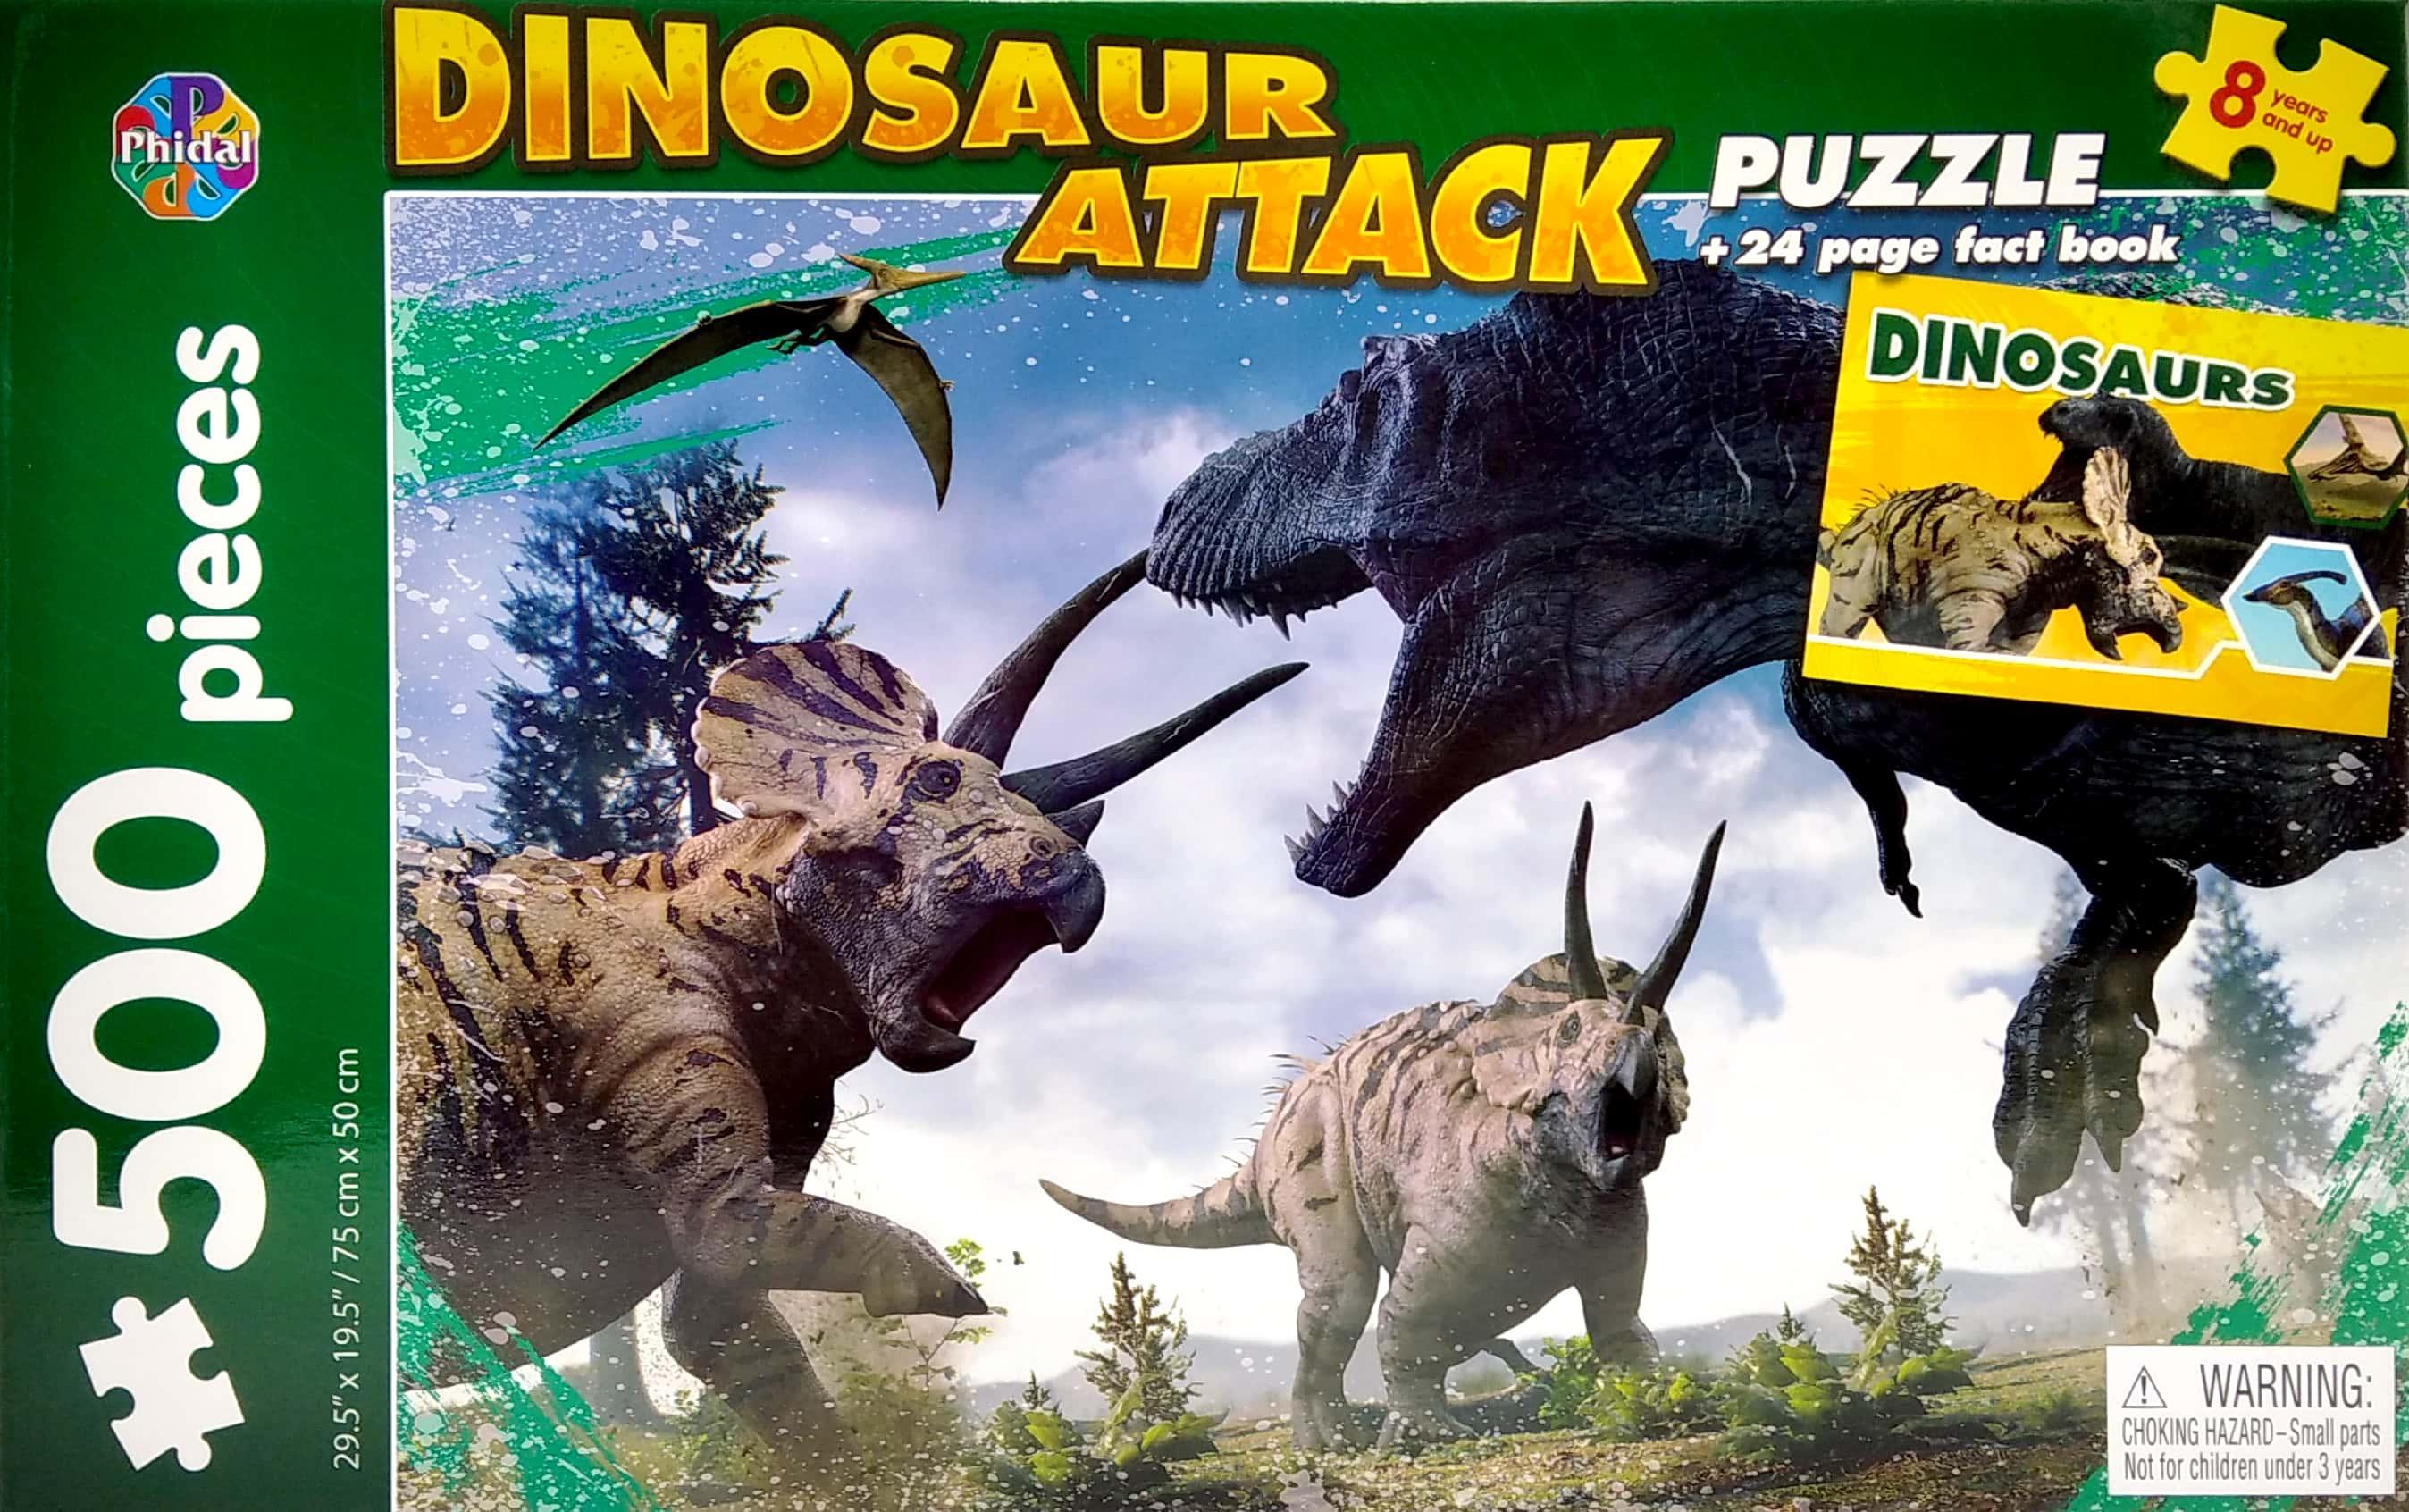 Dinosaur Attack- Jigsaw Puzzle And Fact Book (500 Pieces)